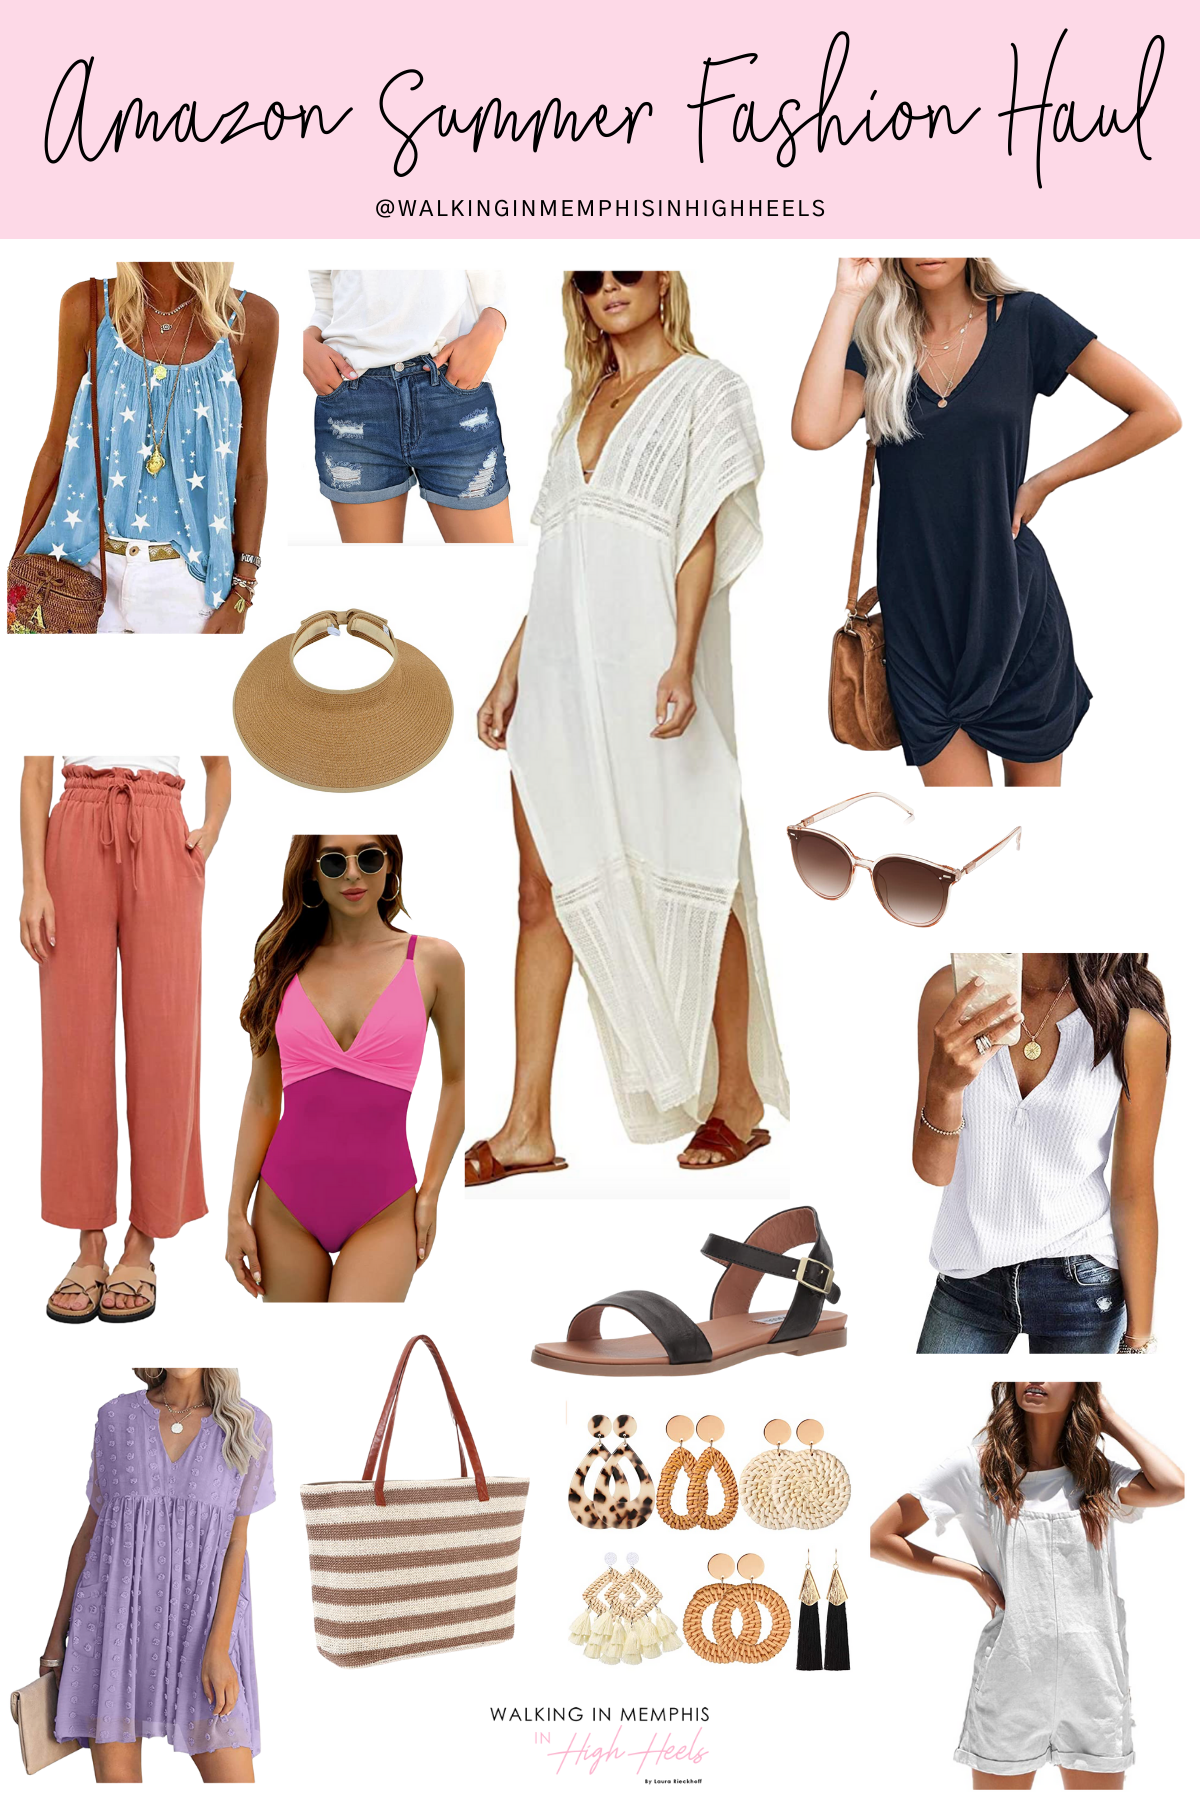 Amazon Summer Fashion Haul featured by top Memphis fashion blogger, Walking in Memphis in High Heels.